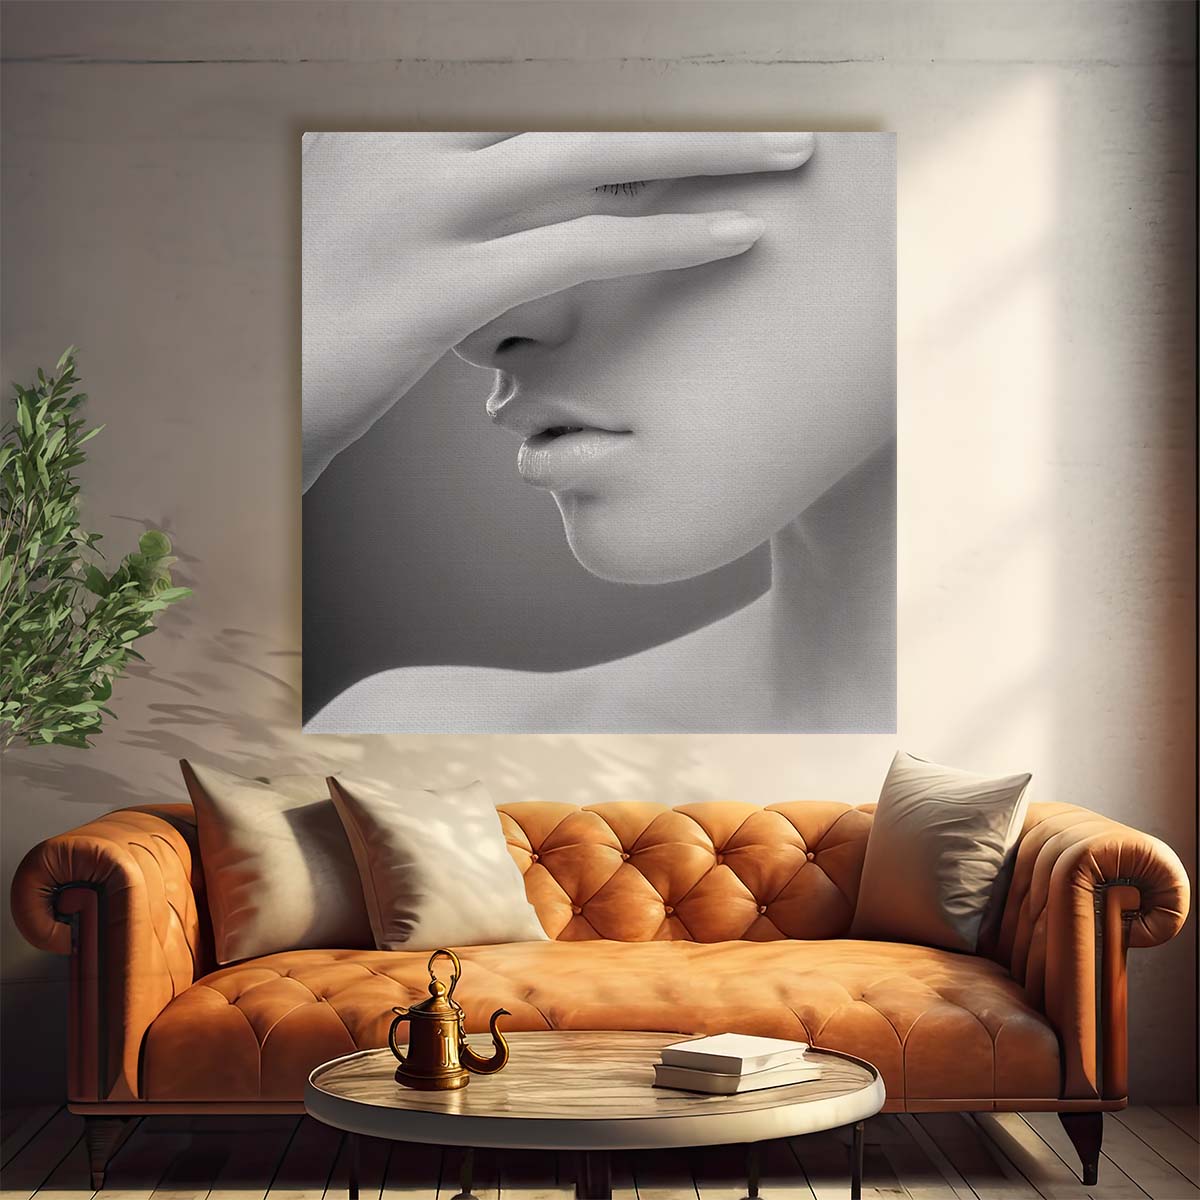 Emotive Monochrome Portrait of a Sensual Woman Photography Wall Art by Luxuriance Designs. Made in USA.